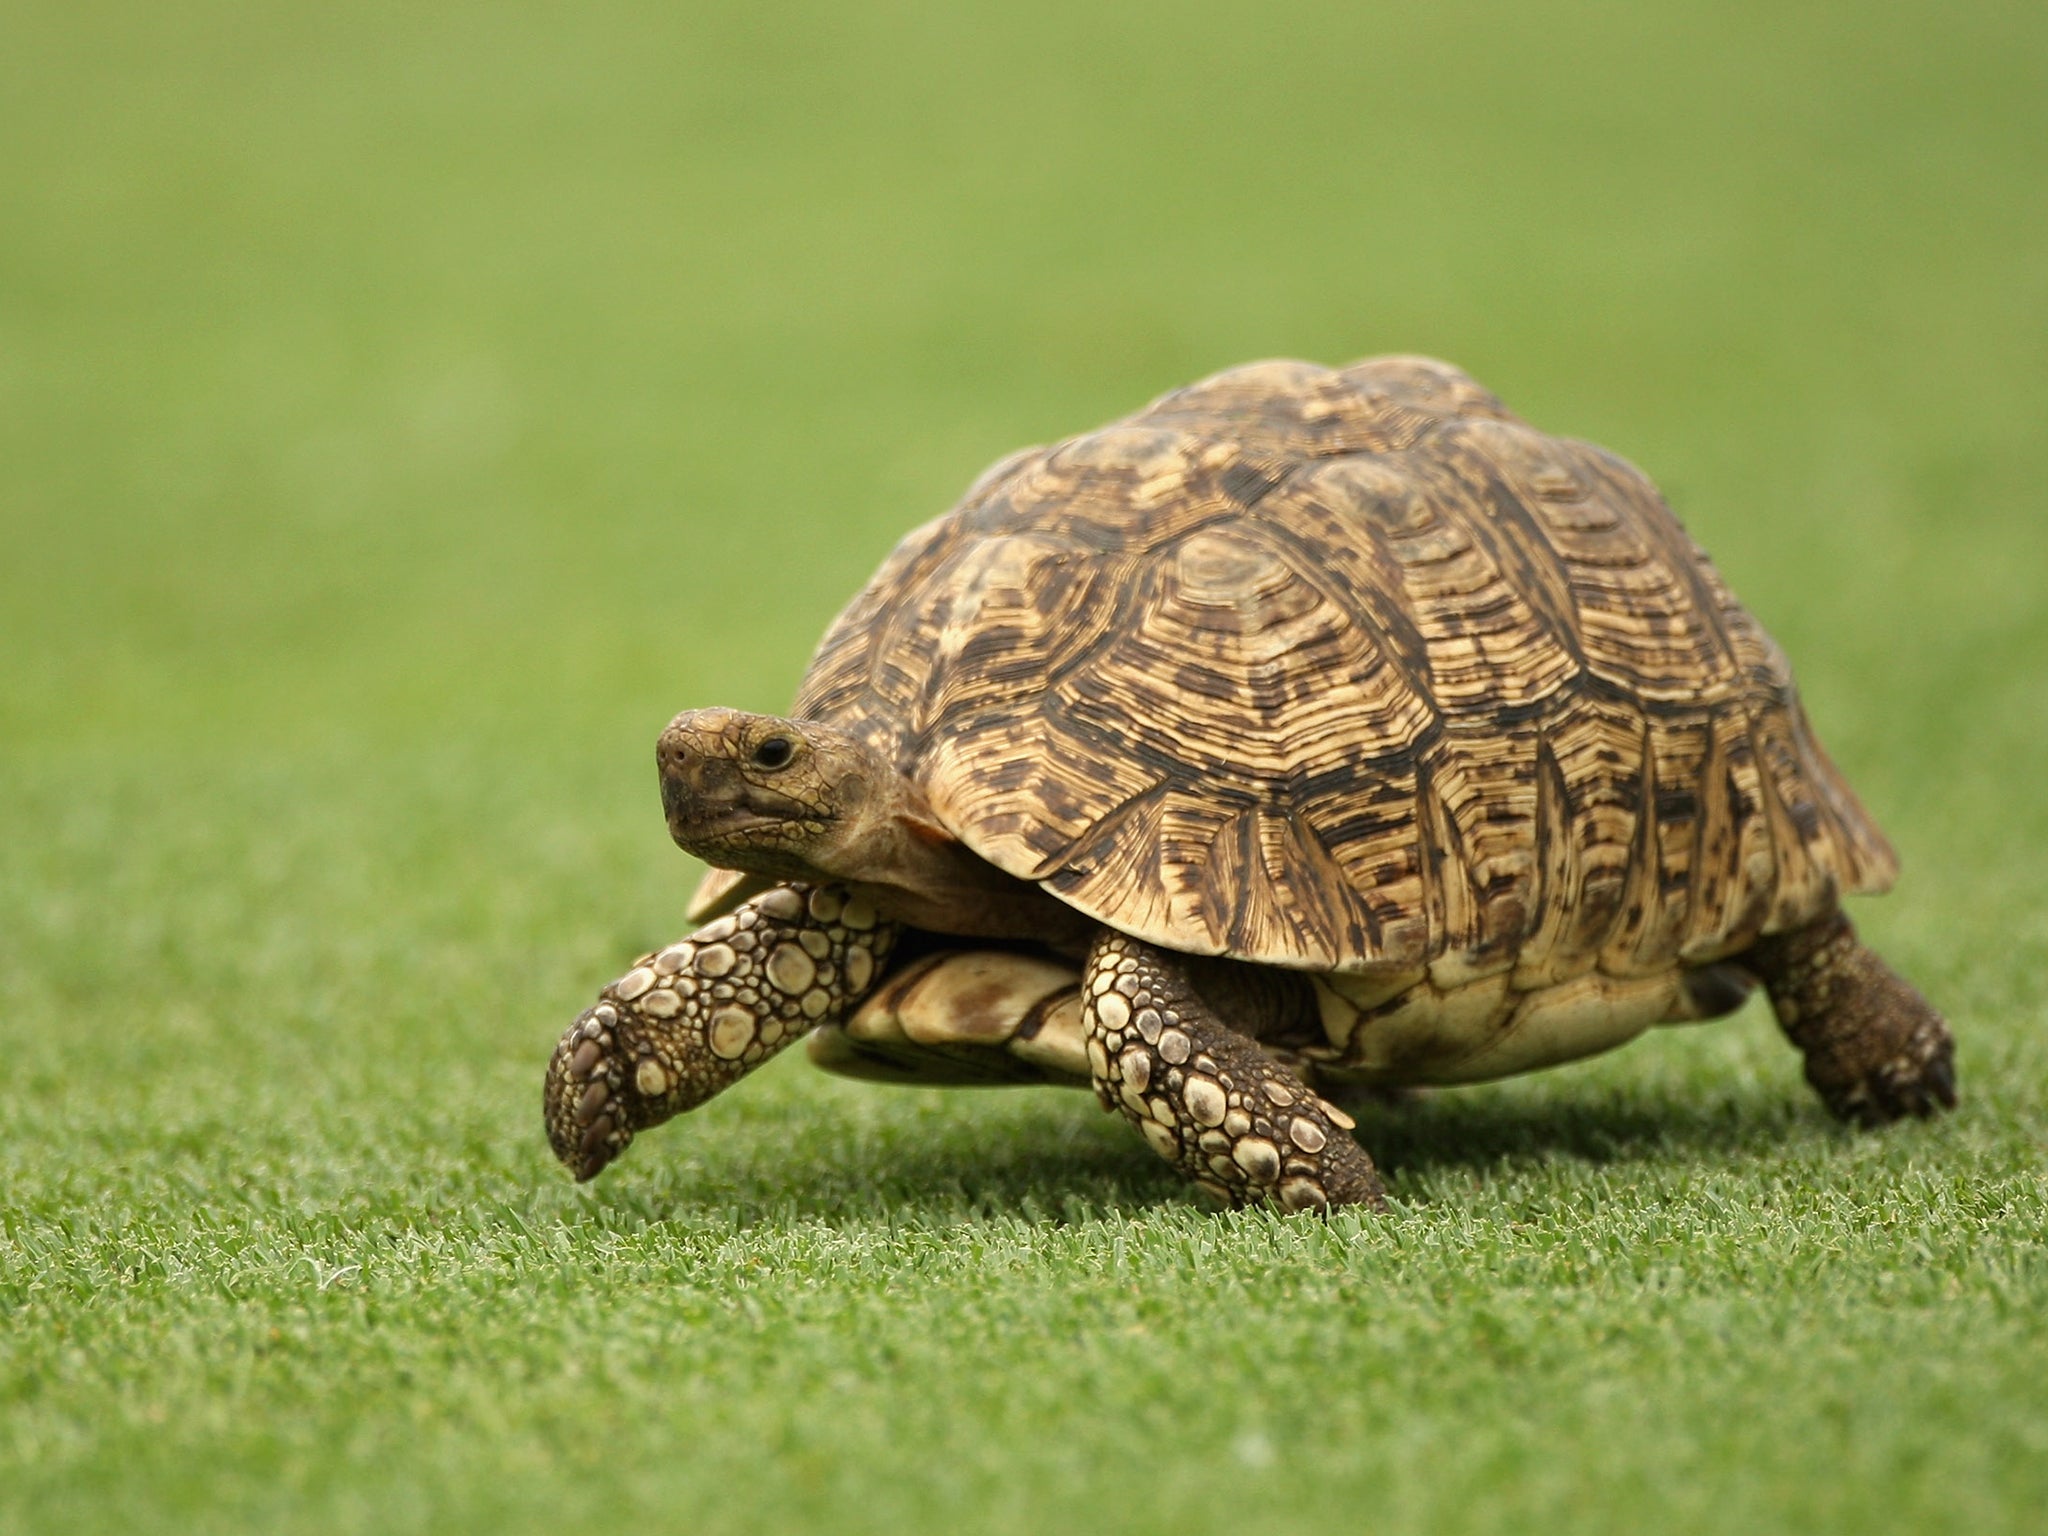 Cleopatra is a Leopard Tortoise, so called because of the distinctive mottled marking on the top of its shell